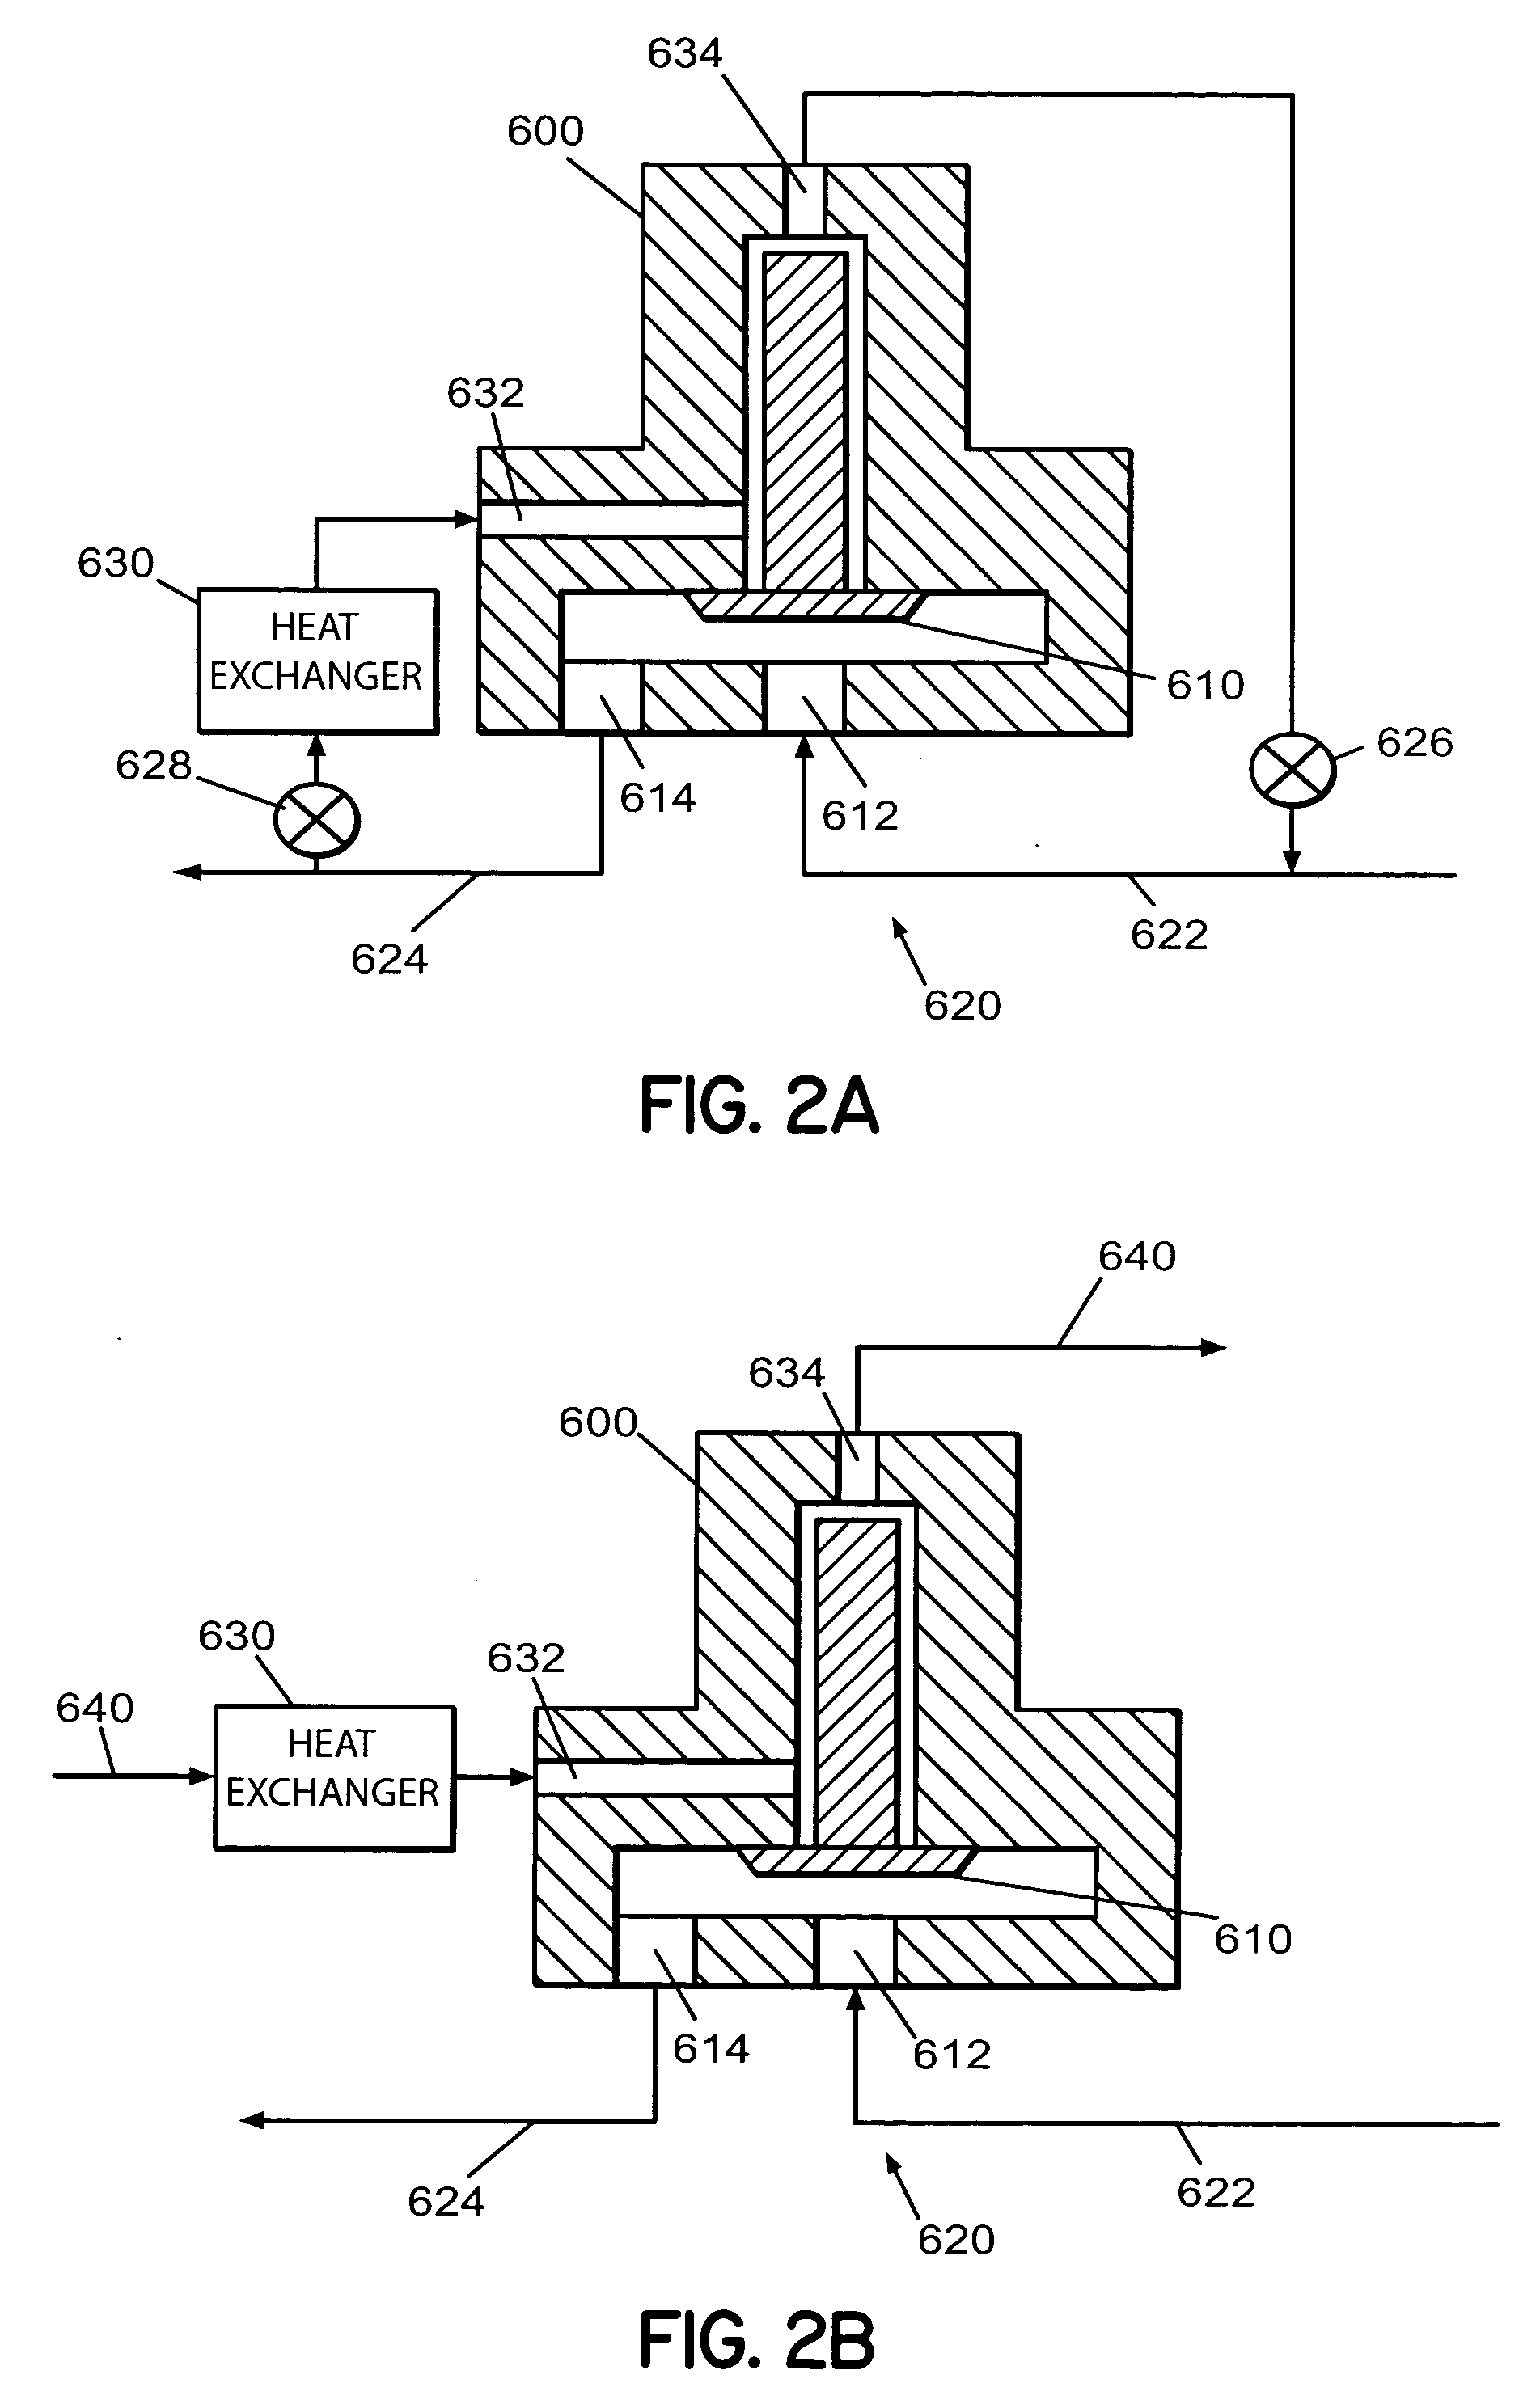 Method and system for flowing a supercritical fluid in a high pressure processing system